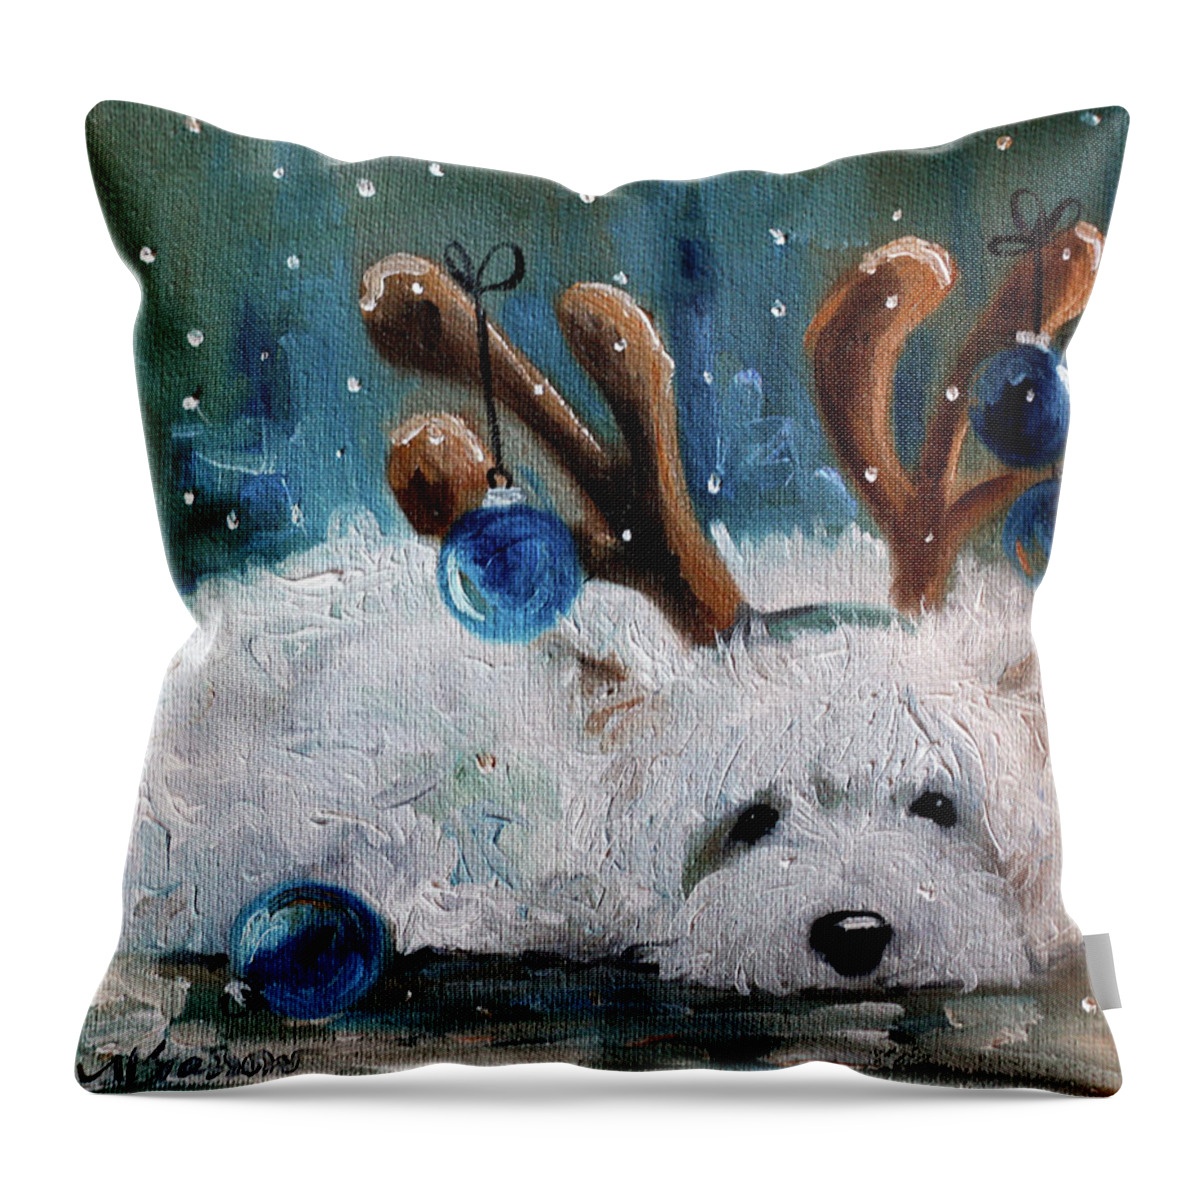 Blue Christmas Throw Pillow featuring the painting Blue Christmas by Mary Sparrow